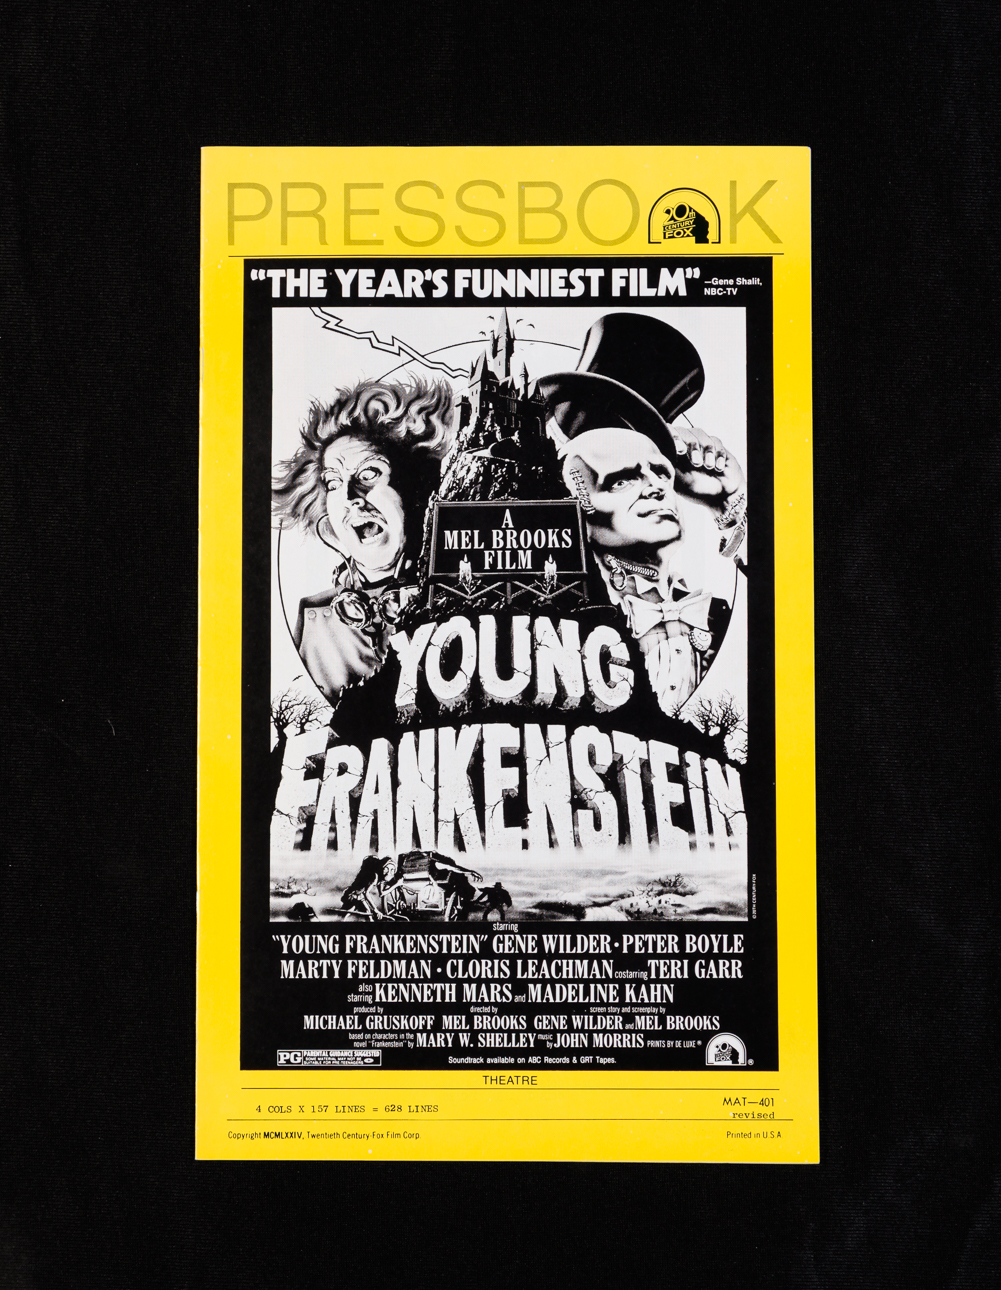 YOUNG FRANKENTSTEIN PRESS BOOK. 20th